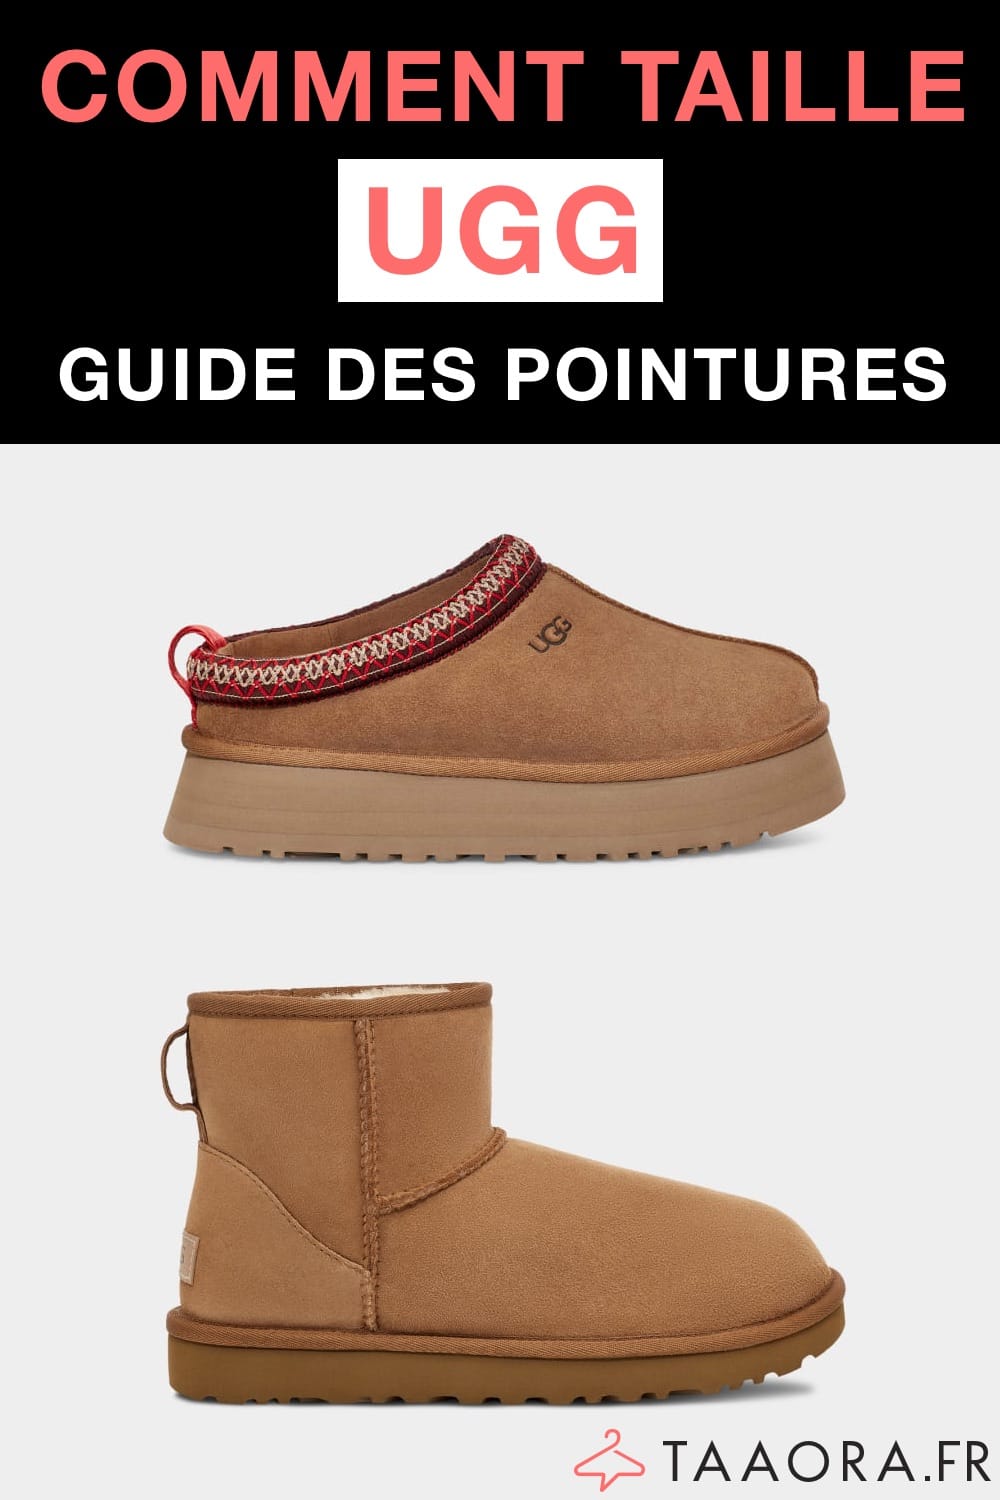 UGG taille grand ou petit ? Guide des pointures